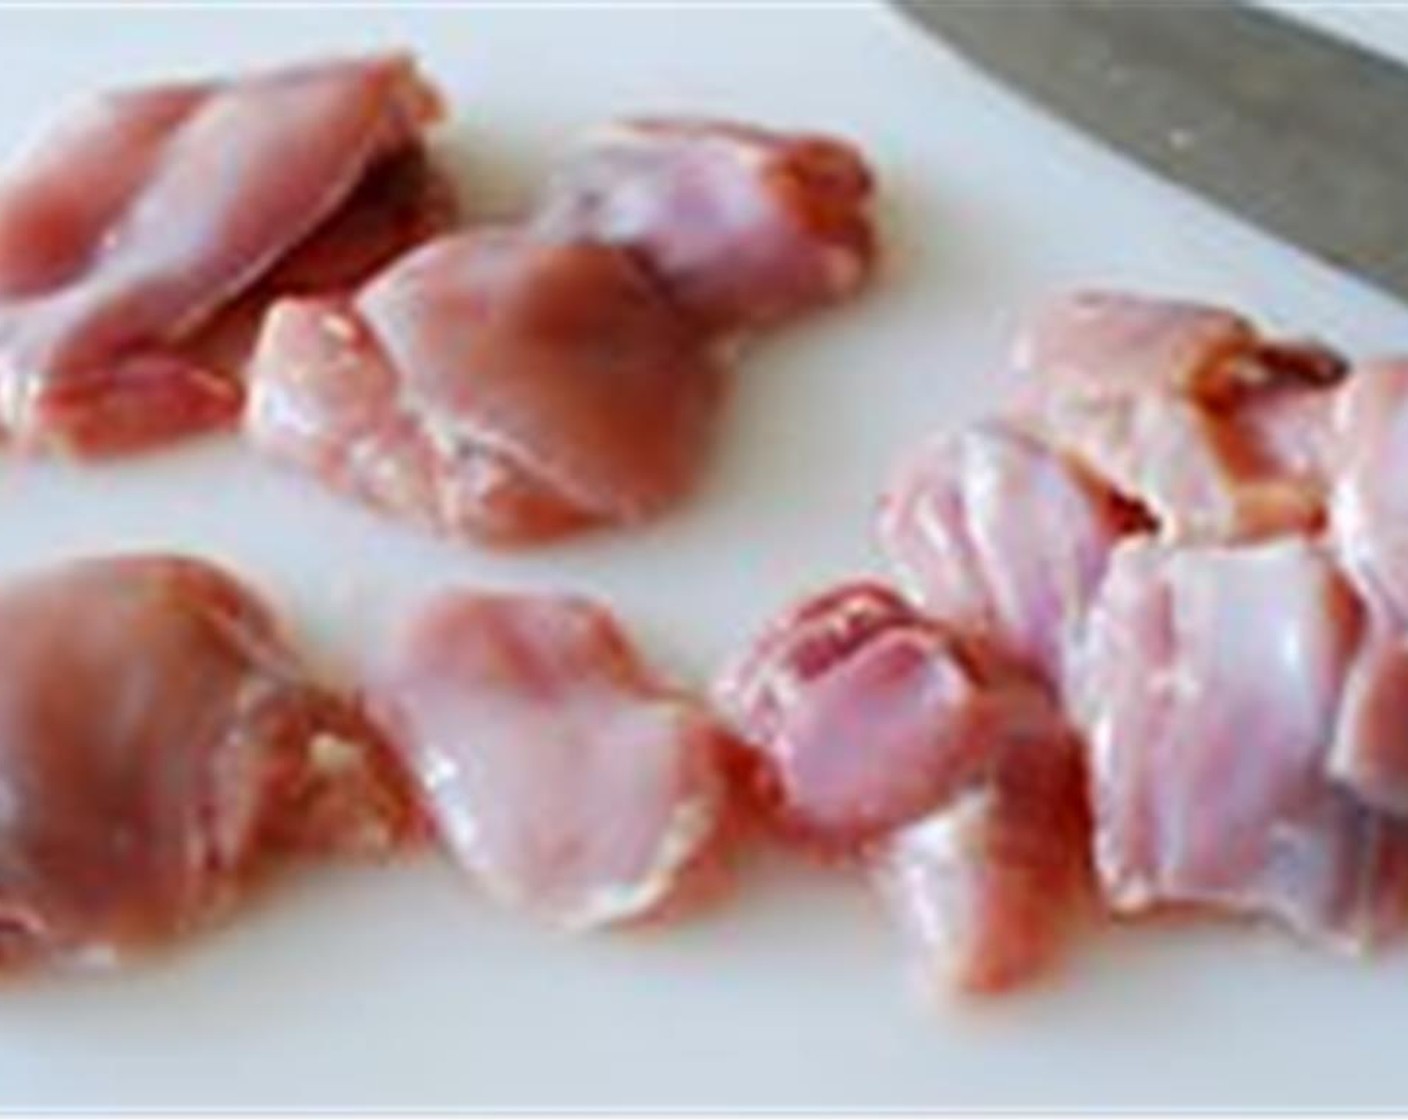 step 1 Rinse Boneless, Skinless Chicken Thigh (1 lb). Trim off excess fat. Cut each of the chicken pieces into small sizes (about 2 inches long and 1 inch wide).